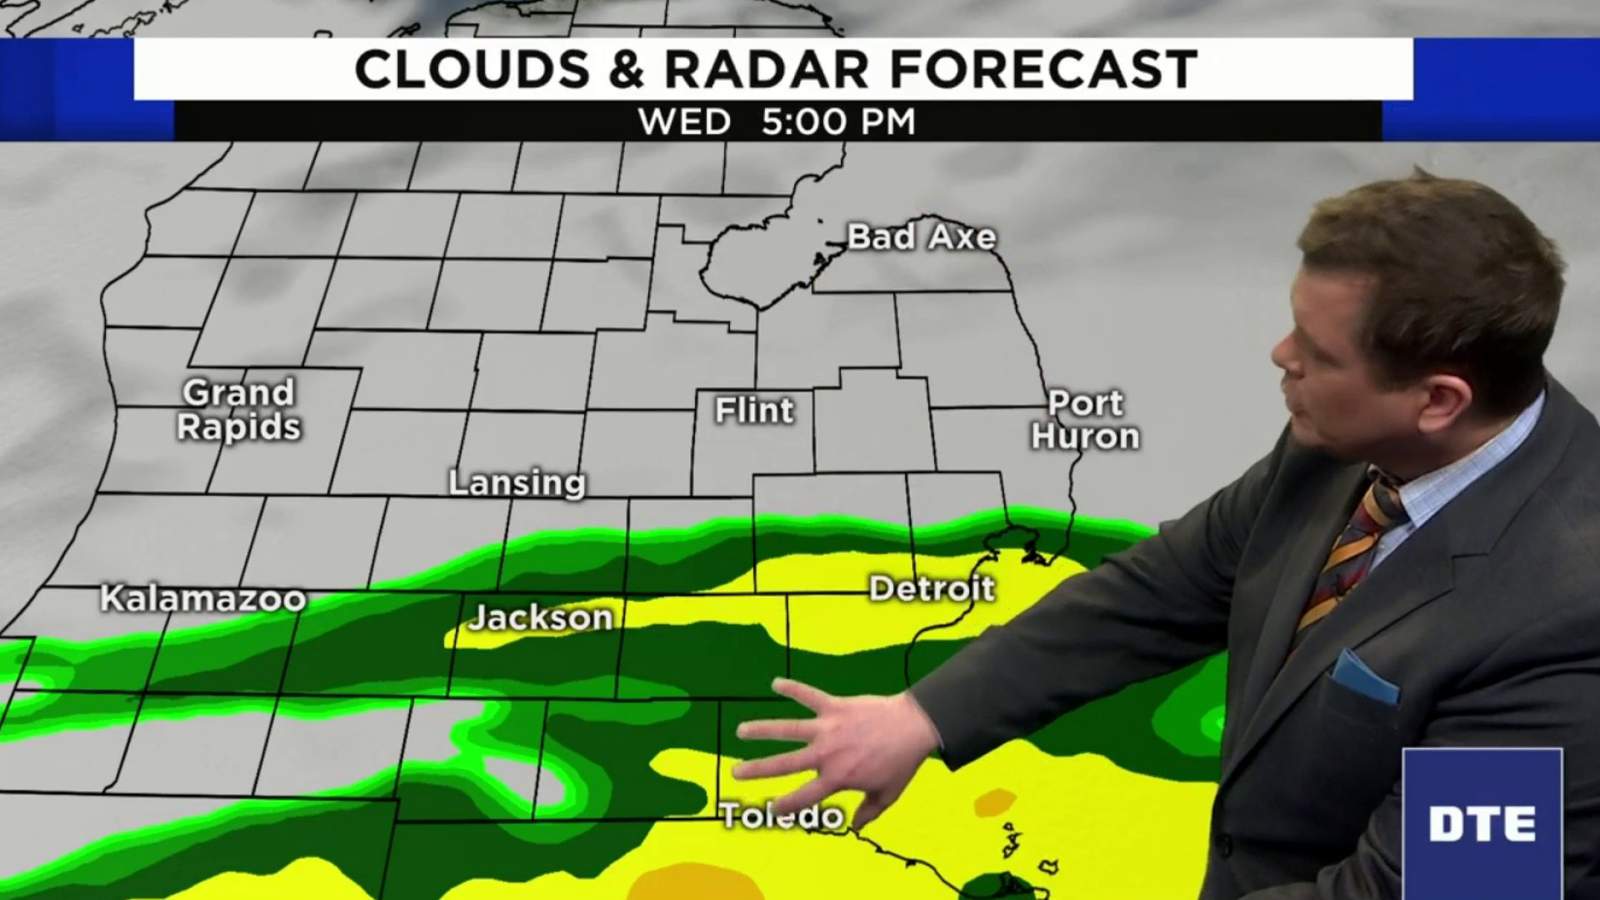 Metro Detroit weather forecast for March 18, 2020 -- morning update